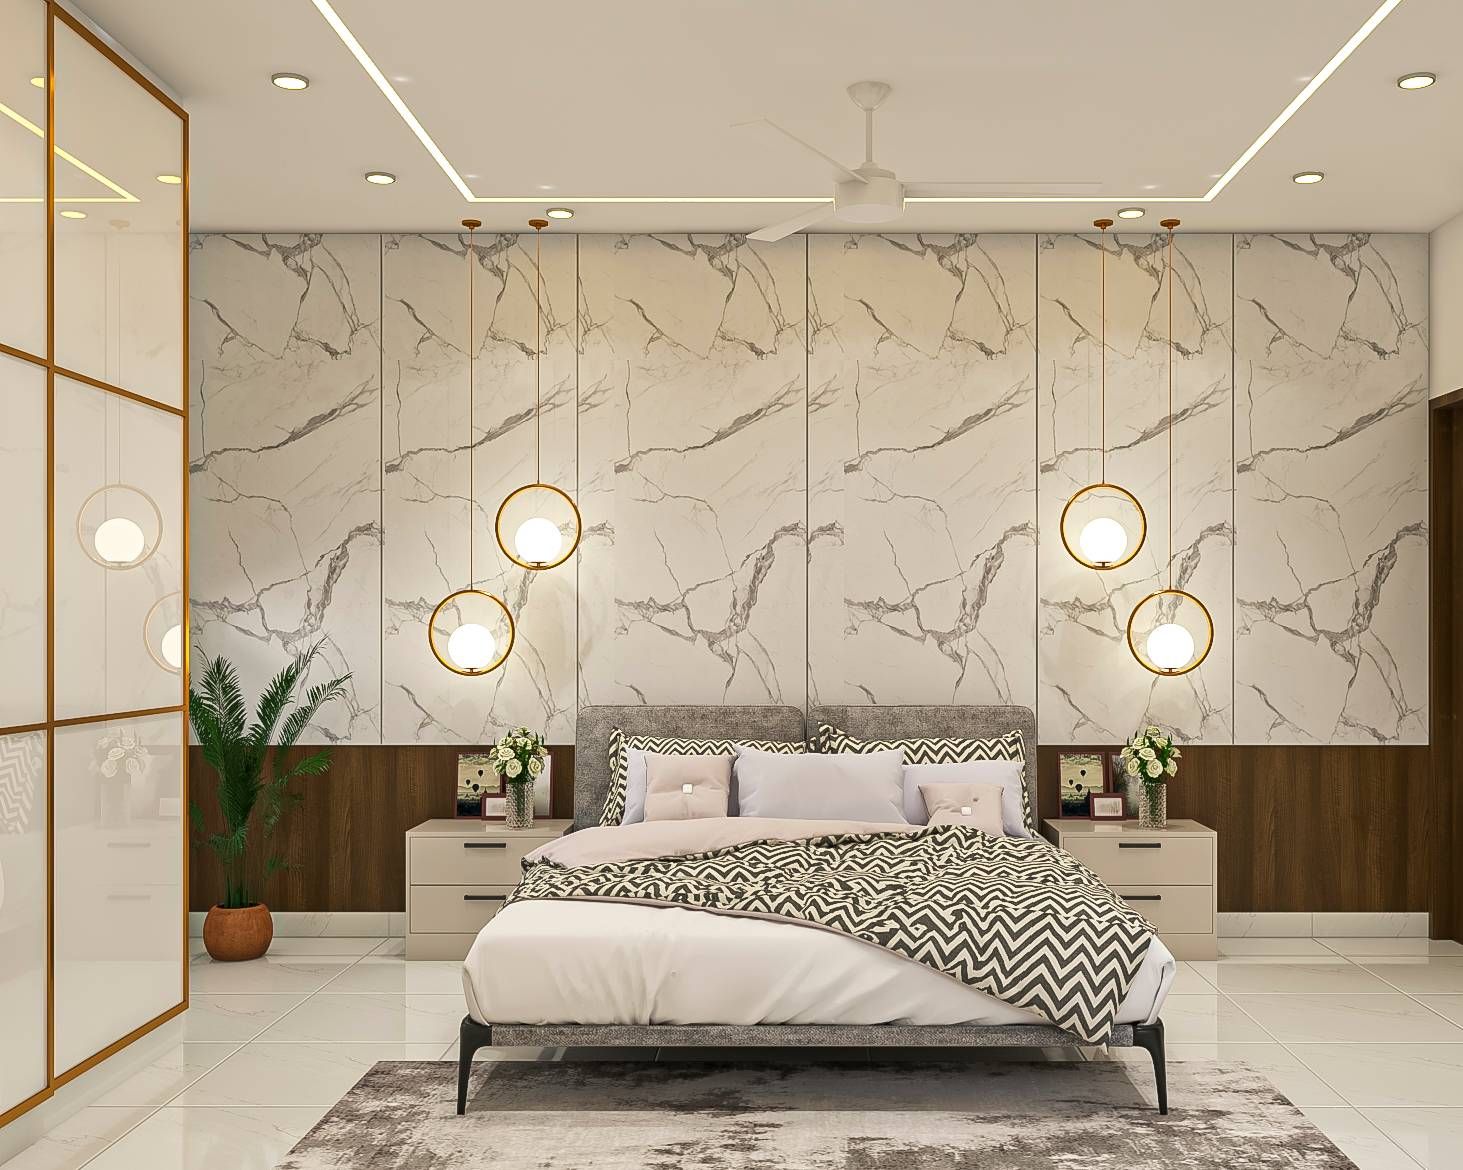 Modern Master Bedroom Design With Marble And Wooden Wall Design